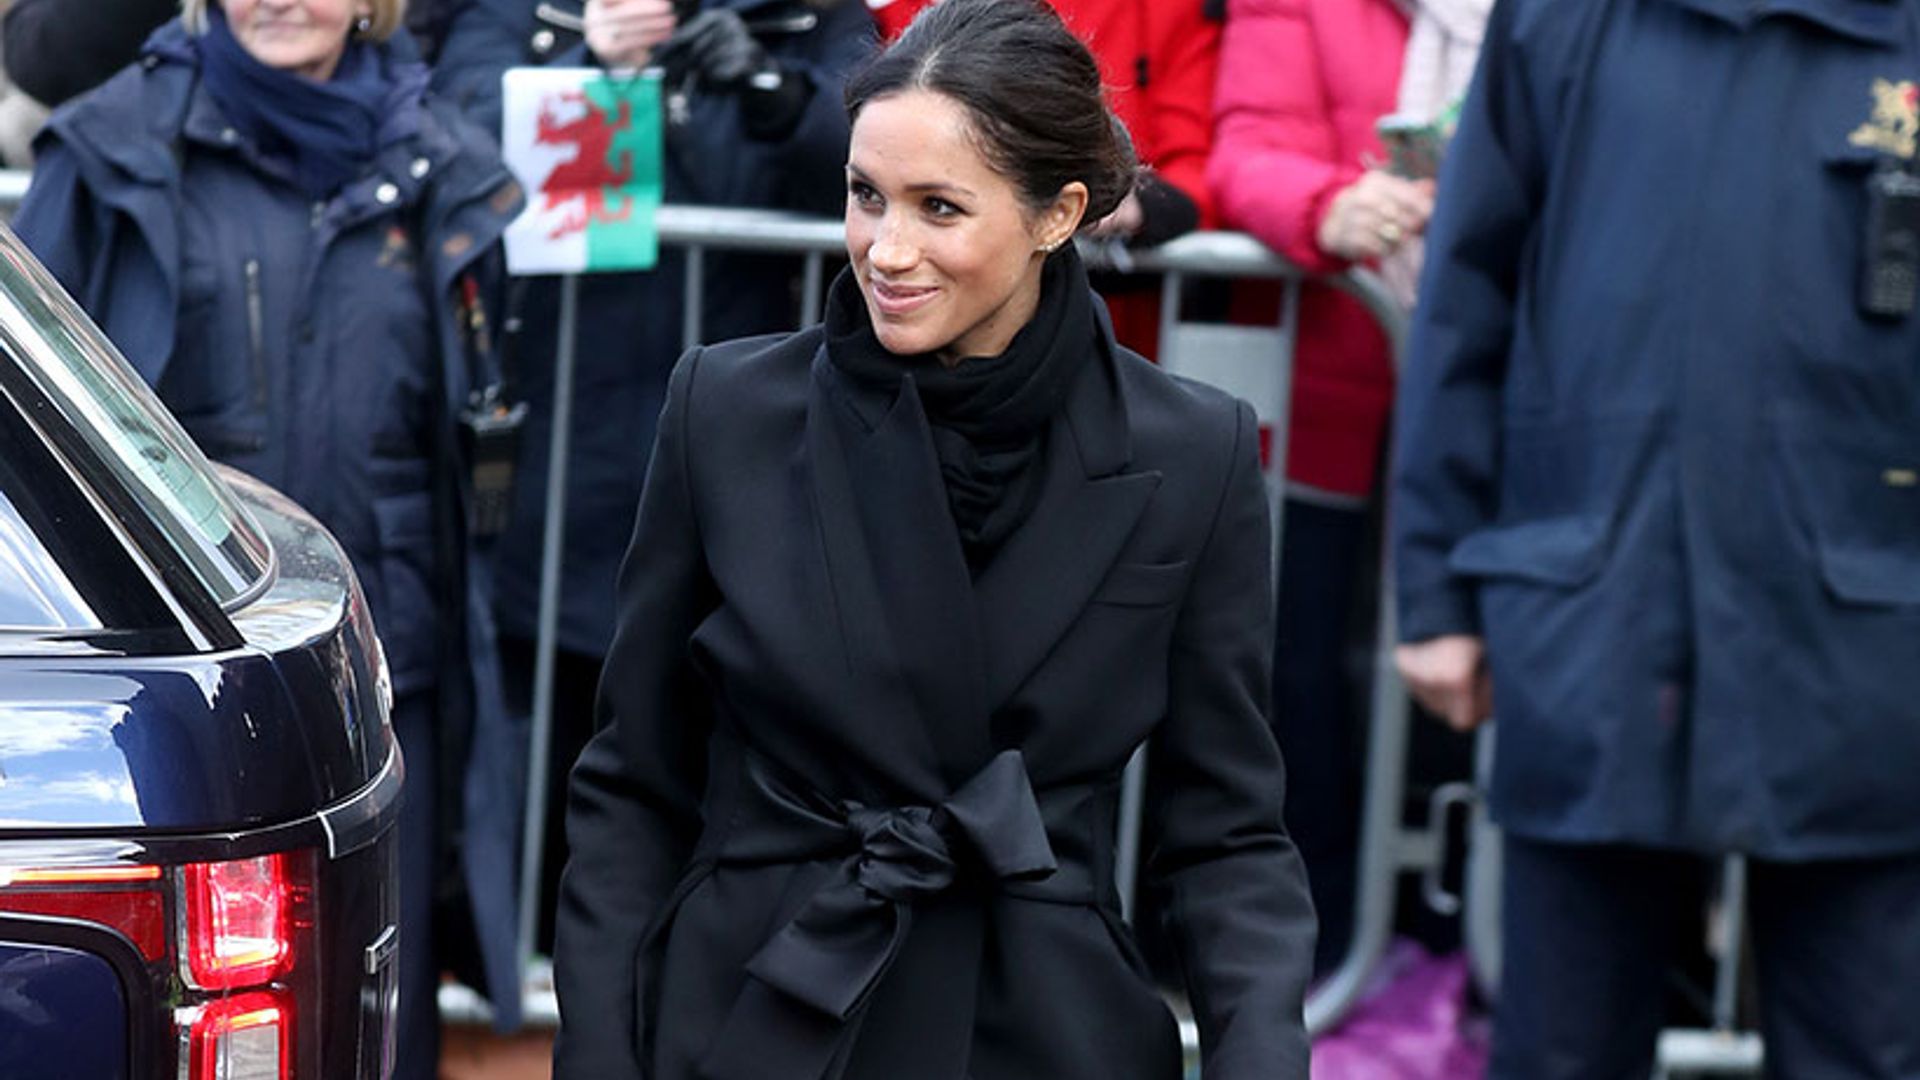 Meghan Markle pays tribute to Wales with Cardiff outfit